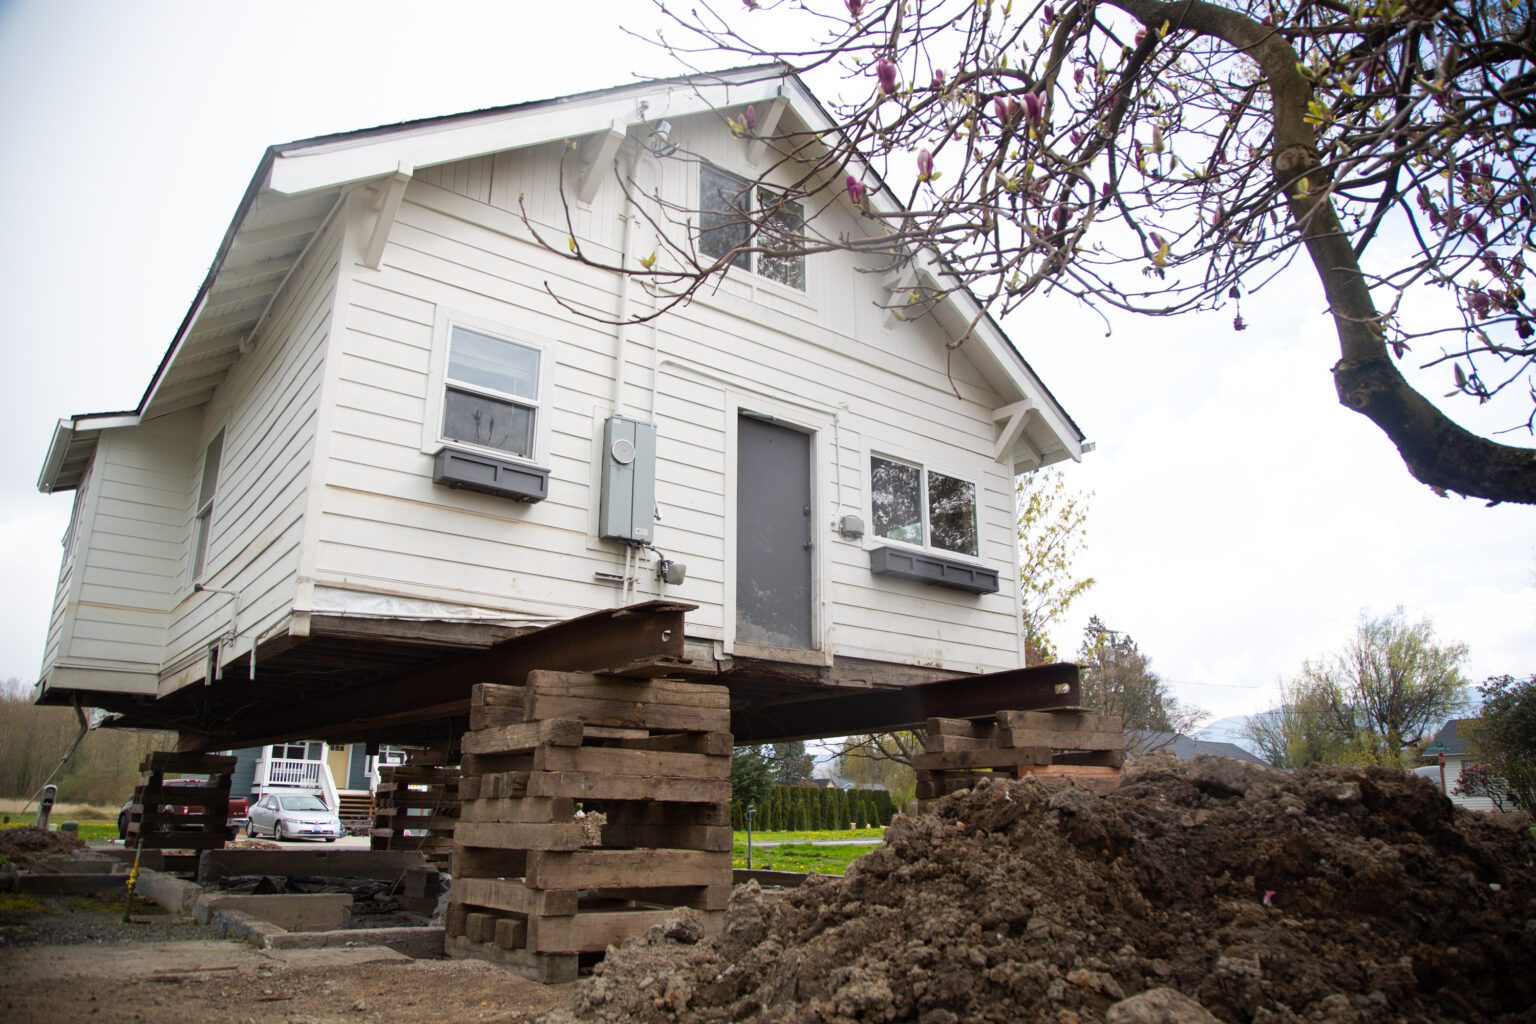 Nicole Miller's two-bedroom home was lifted off its foundation for repairs following the floods in Sumas in November. There are only a few companies in Whatcom capable of lifting Miller's home onto stilts. One tried to charge Miller over $30